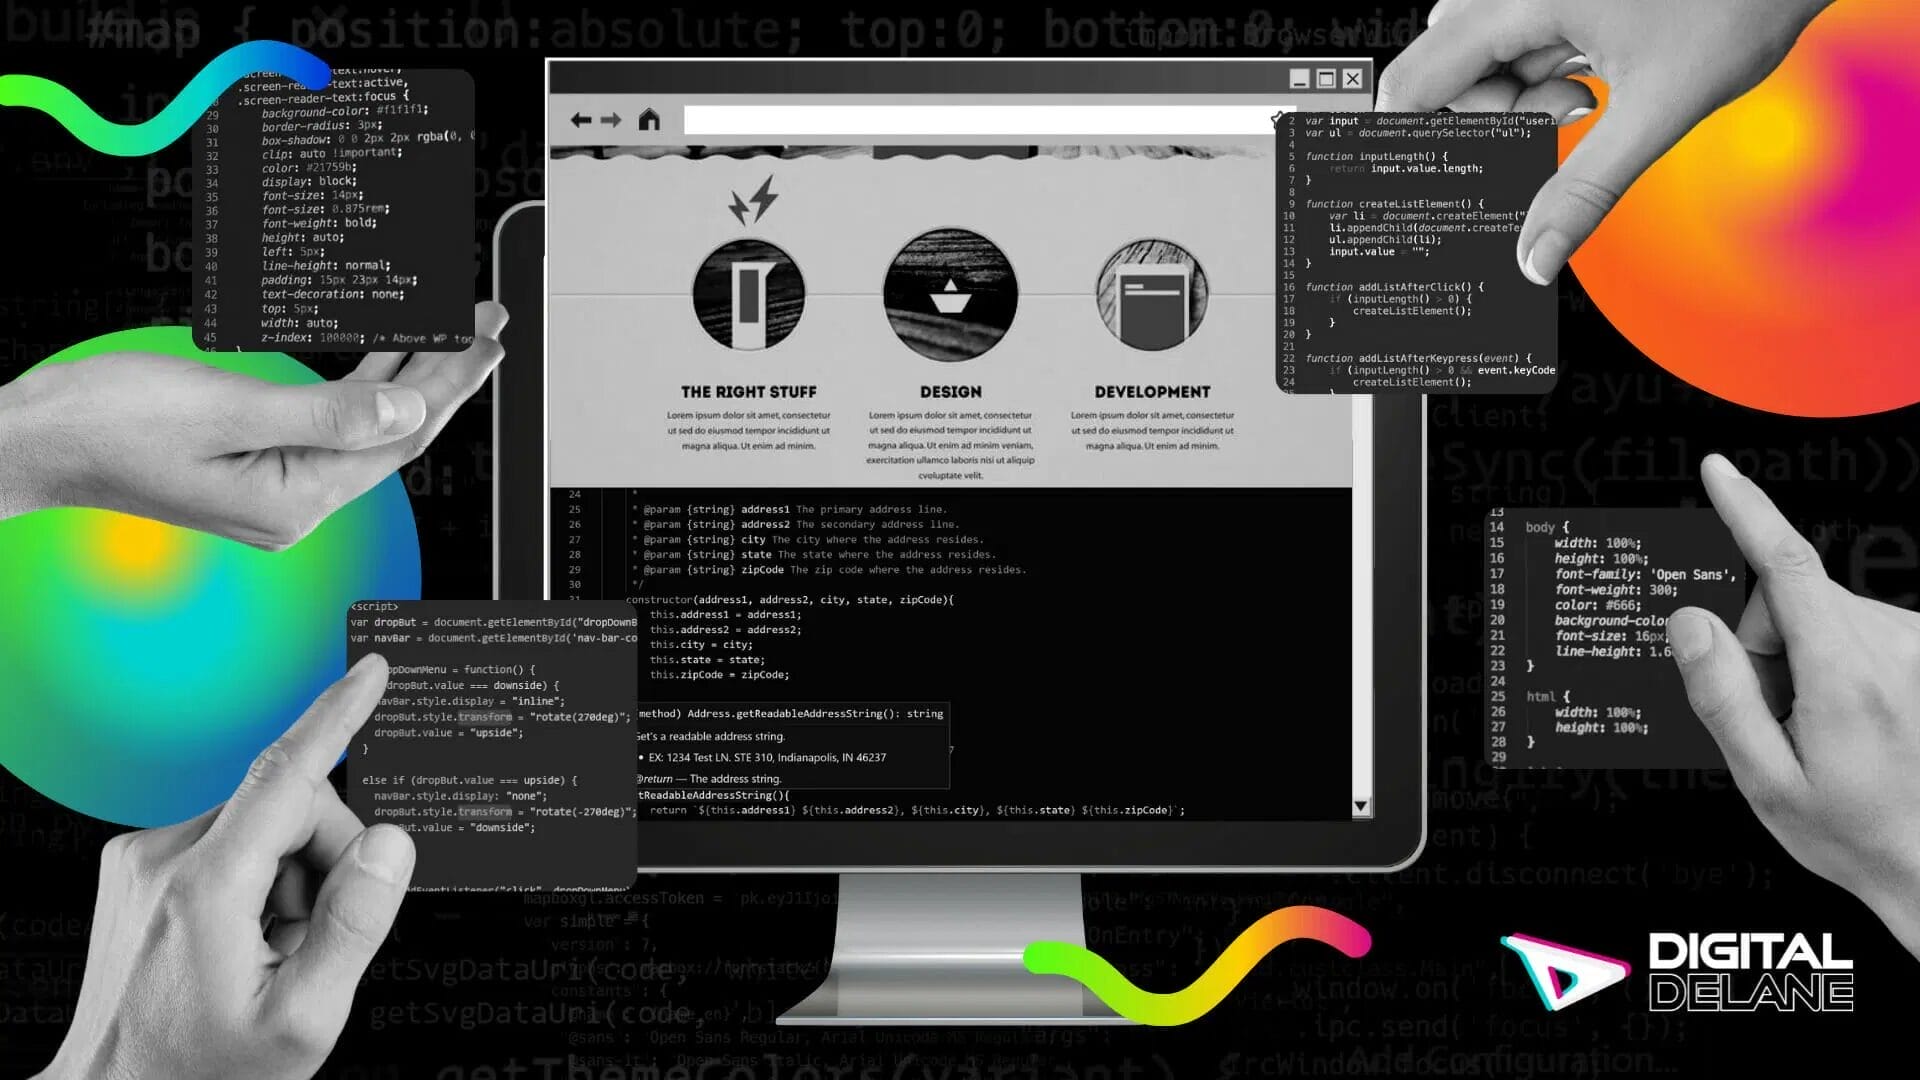 A Professional Agency that Helps with Web Design and Development